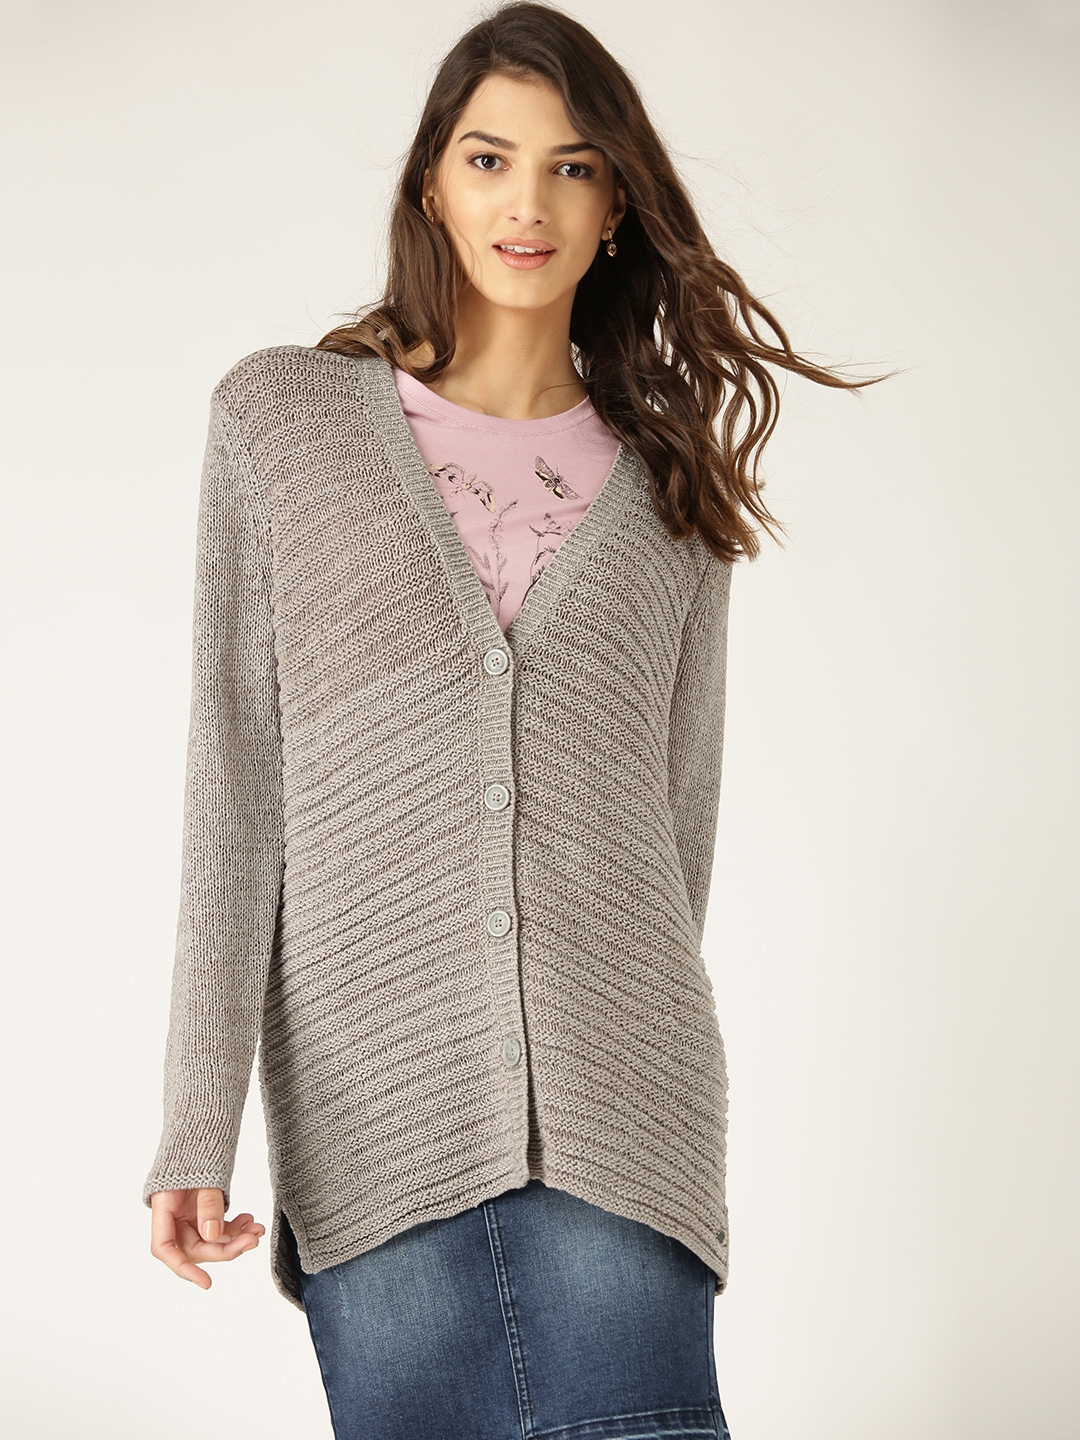 Buy ESPRIT Women Taupe Patterned Cardigan - Sweaters for Women 1737781 ...